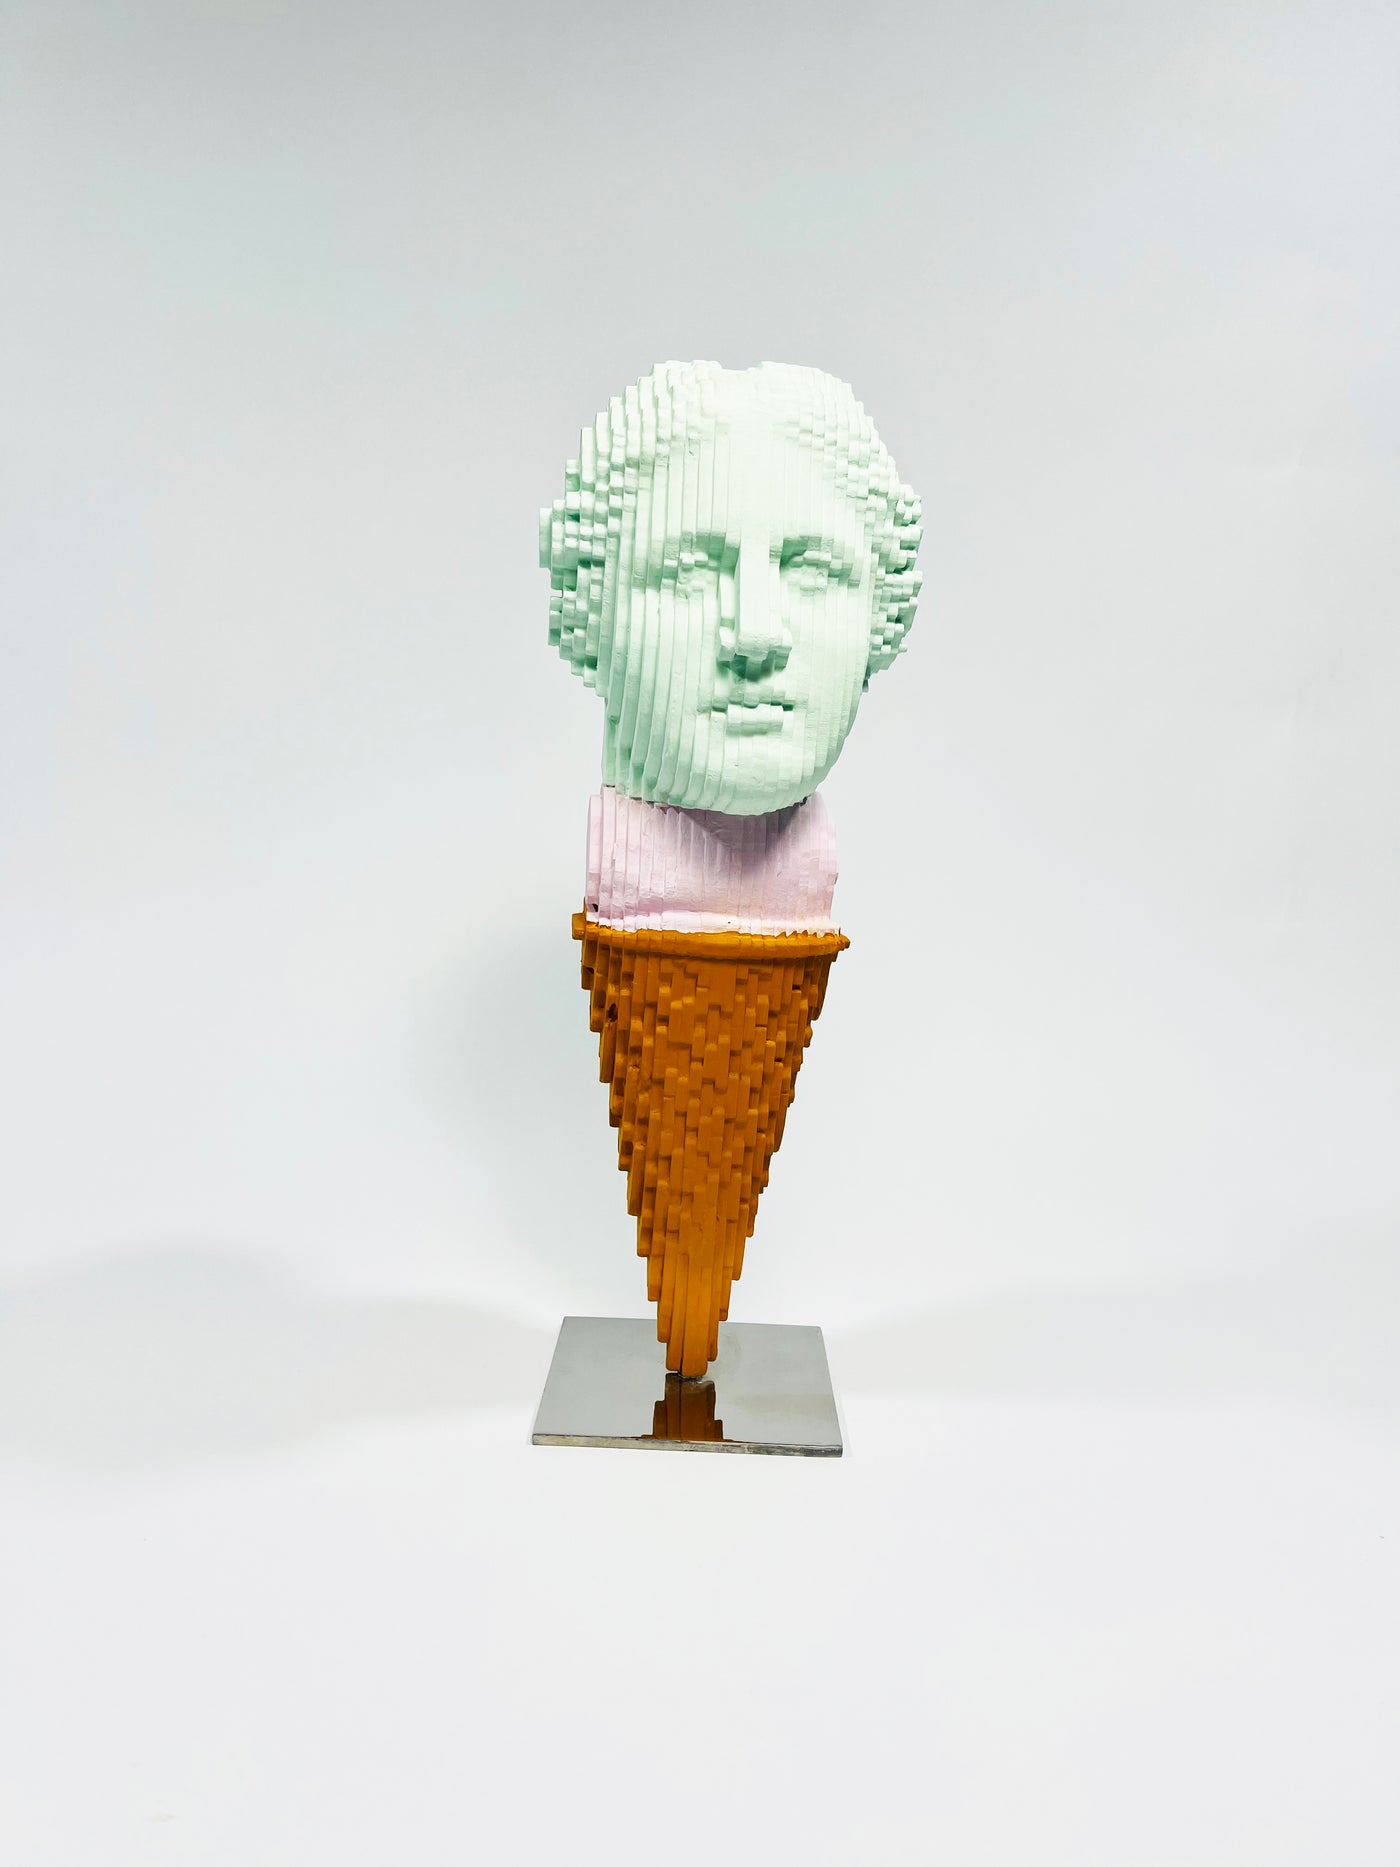 Daniele Fortuna - Thologiny Ice Cream Mint and Strawberry - Unique Sculpture - Acrylic on wood - 2023